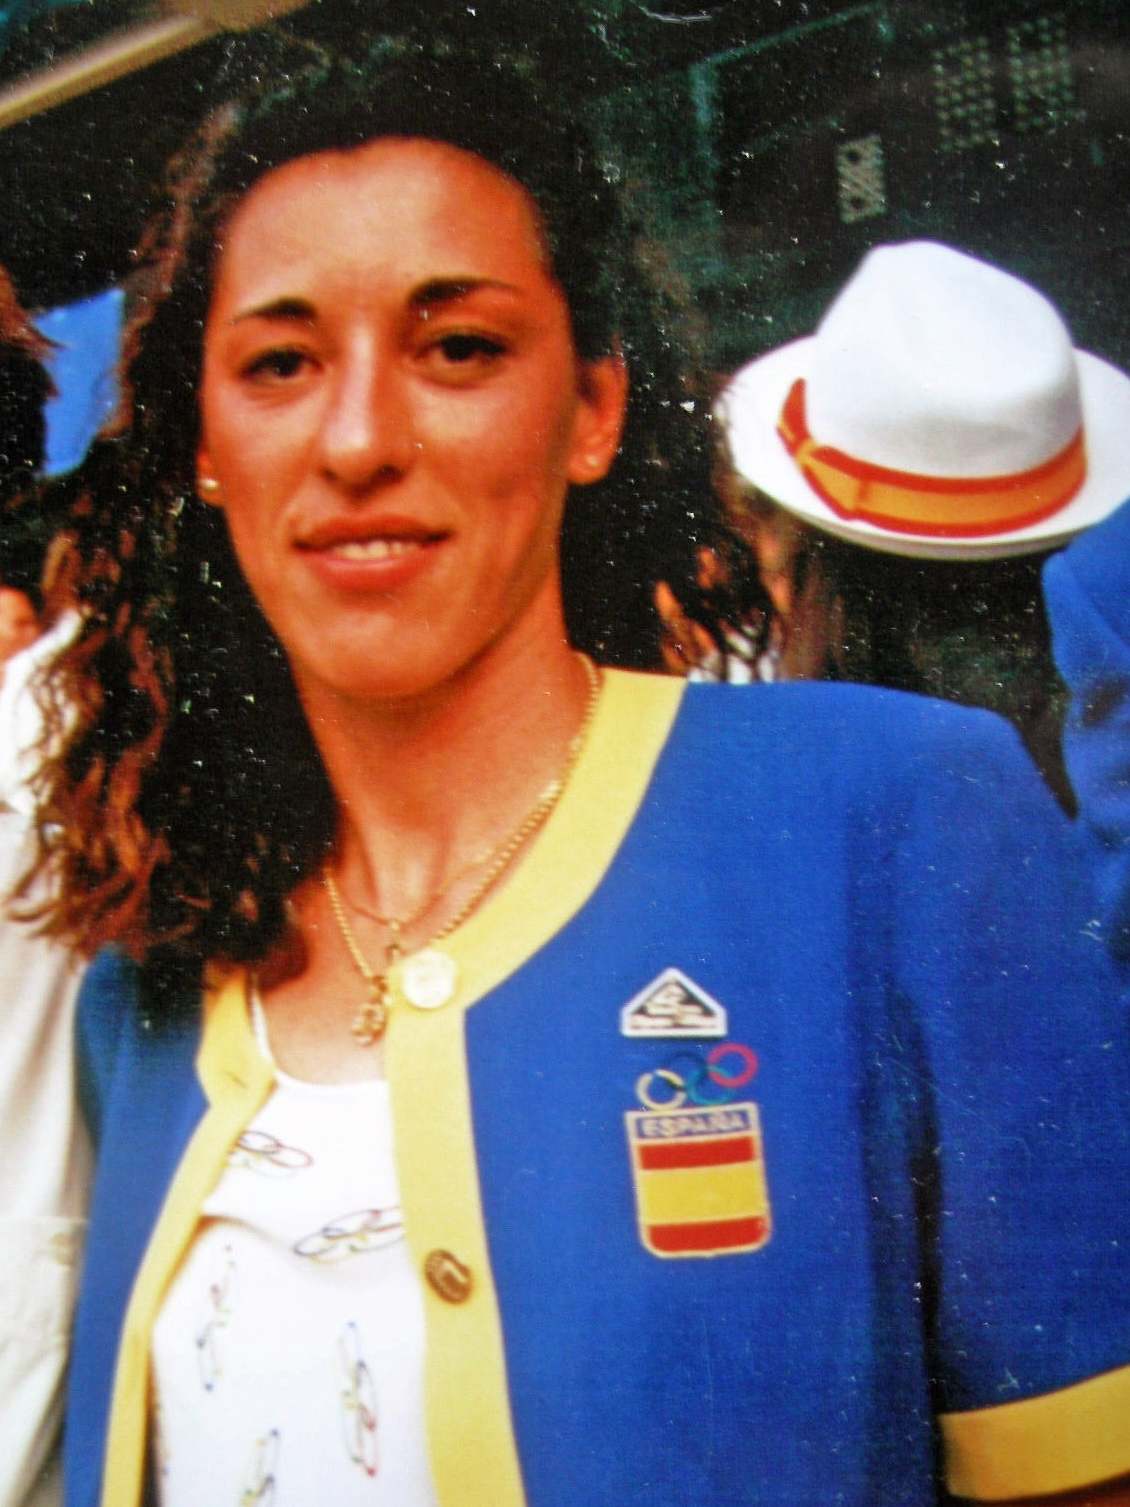 Paredes went on to represent Spain at the Atlanta Olympics in 1996